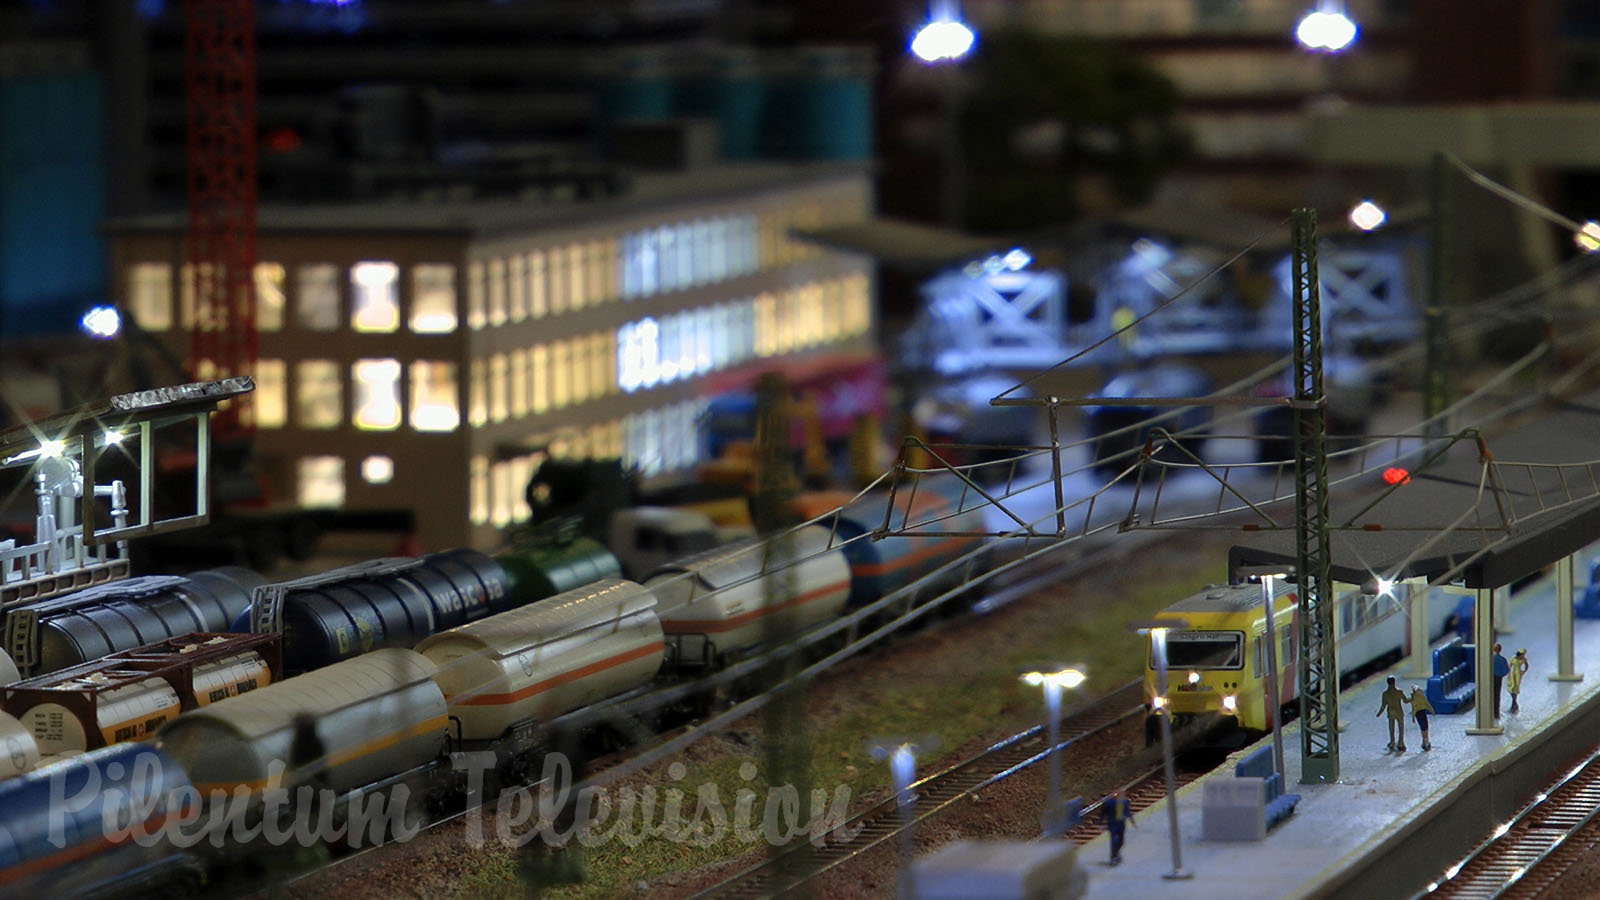 Incredibly detailed model railroad layout of a miniature chemical plant in Z scale